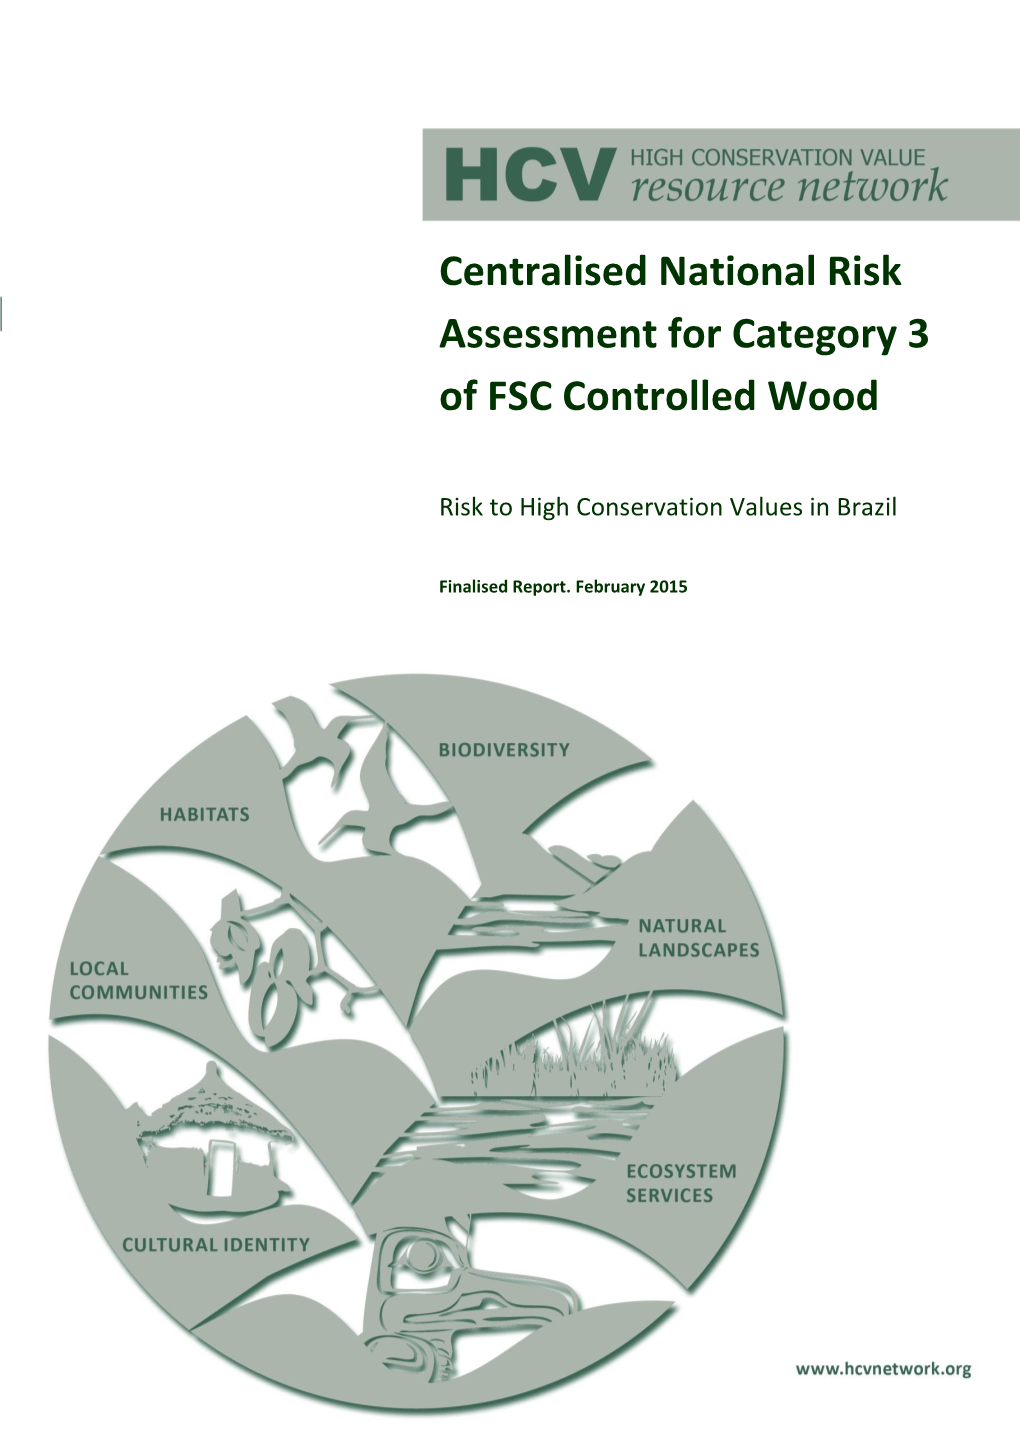 Centralised National Risk Assessment for Category 3 of FSC Controlled Wood